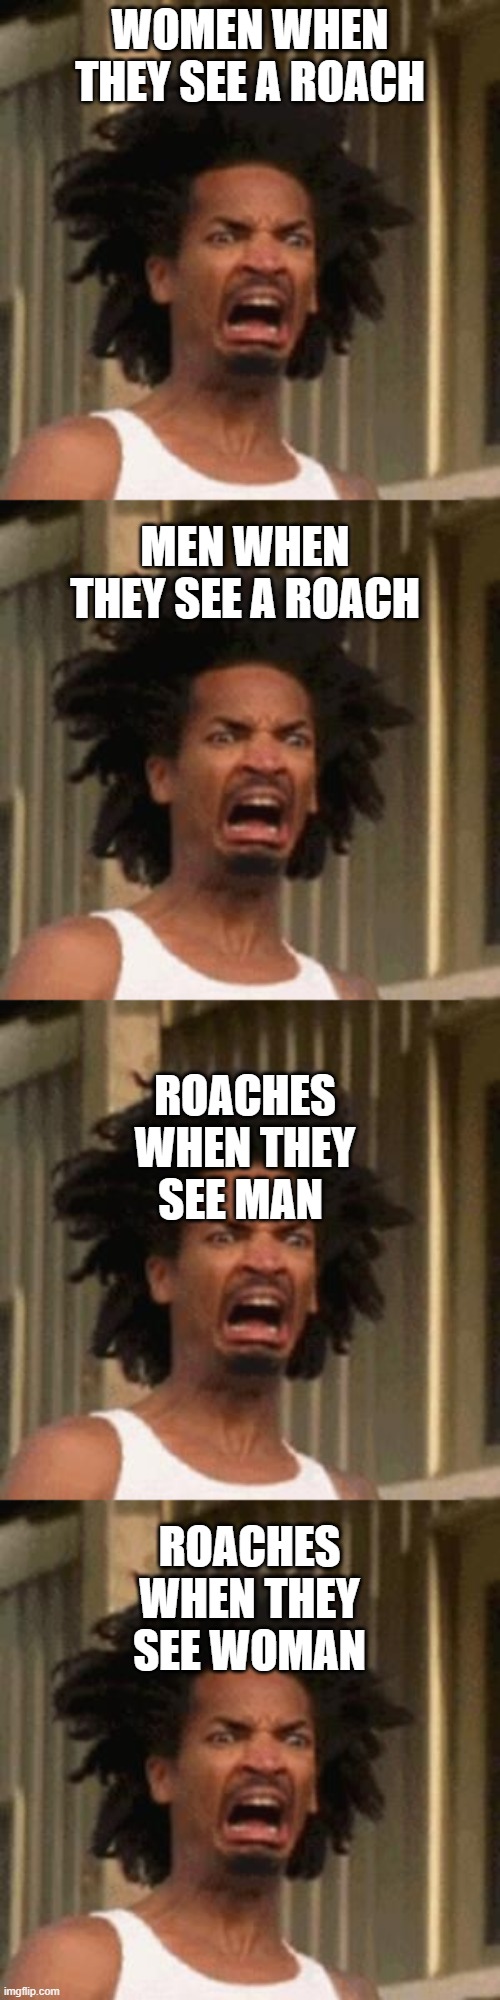 Roaches and man funfact | WOMEN WHEN THEY SEE A ROACH; MEN WHEN THEY SEE A ROACH; ROACHES WHEN THEY SEE MAN; ROACHES WHEN THEY SEE WOMAN | image tagged in crab man eww,funfacts | made w/ Imgflip meme maker